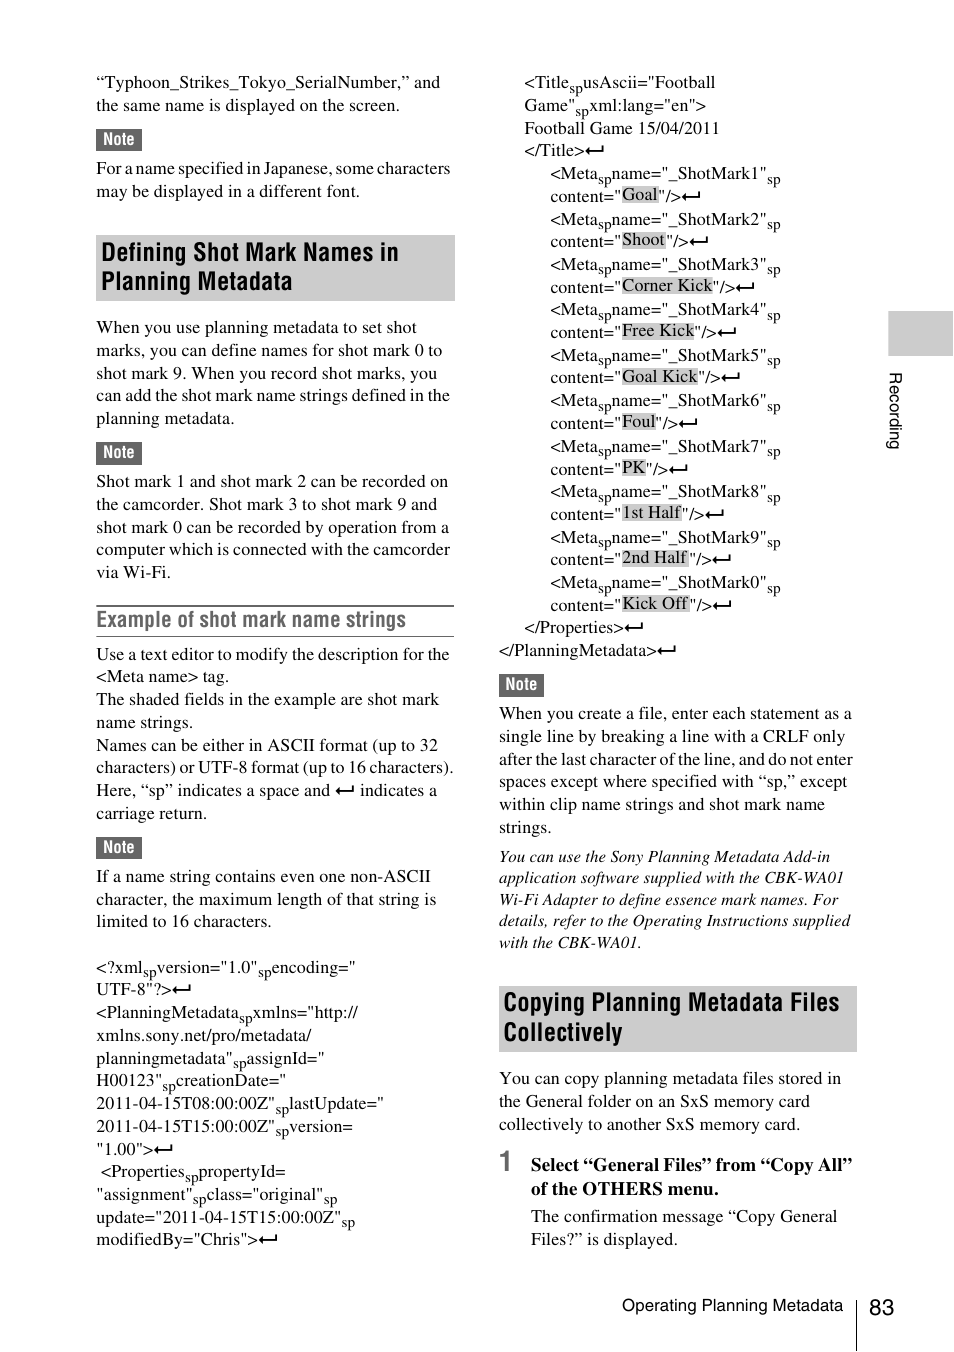 Defining shot mark names in planning metadata, Copying planning metadata files collectively, Example of shot mark name strings | Sony PMW-F3K User Manual | Page 83 / 164